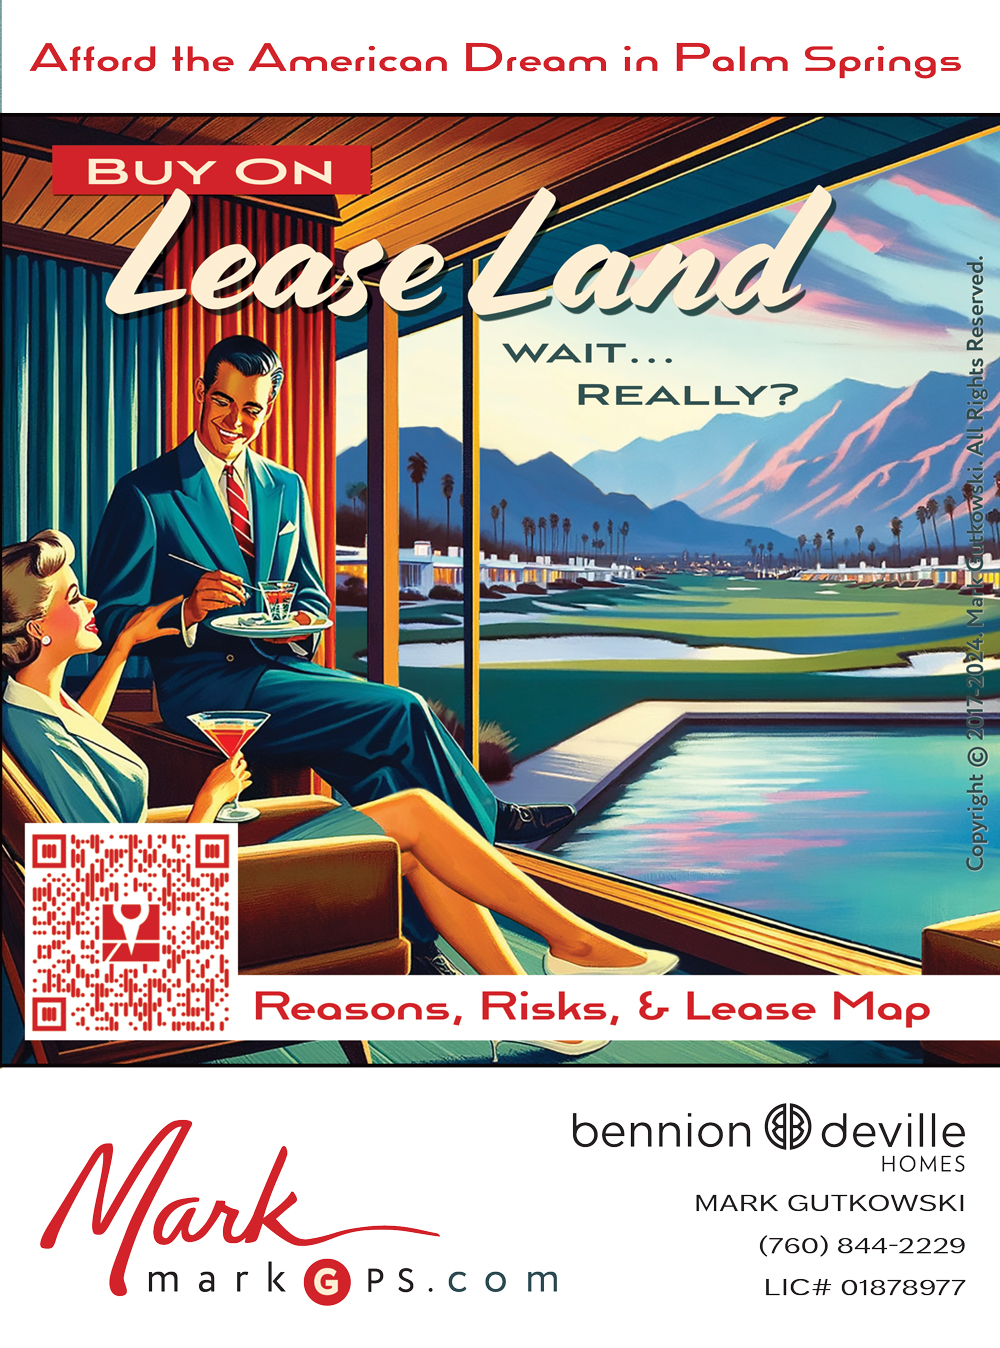 Palm Springs Lease Land Map - This Mid-century vintage travel poster describes that buying on Palm Springs lease land is potentially a way to afford the American dream of home ownership. A woman and man sit in a stylish mid-centry modern home looking across the pool outside at the Indian Canyons neighborhood and the San Jacinto mountain range at sunset. Mark Gutkowski Realto has a QR code labled Reasons, Risks, and Lease Map to allow scanning and see the Palm Springs Lease Land Map online with Lease Land Maps for each Palm Springs Neighborhood. This map shows that the invisible checkerboard of Palm Springs Lease Land is not actually a checkerboard pattern when considering residential real estate on Lease Land in Palm Springs.